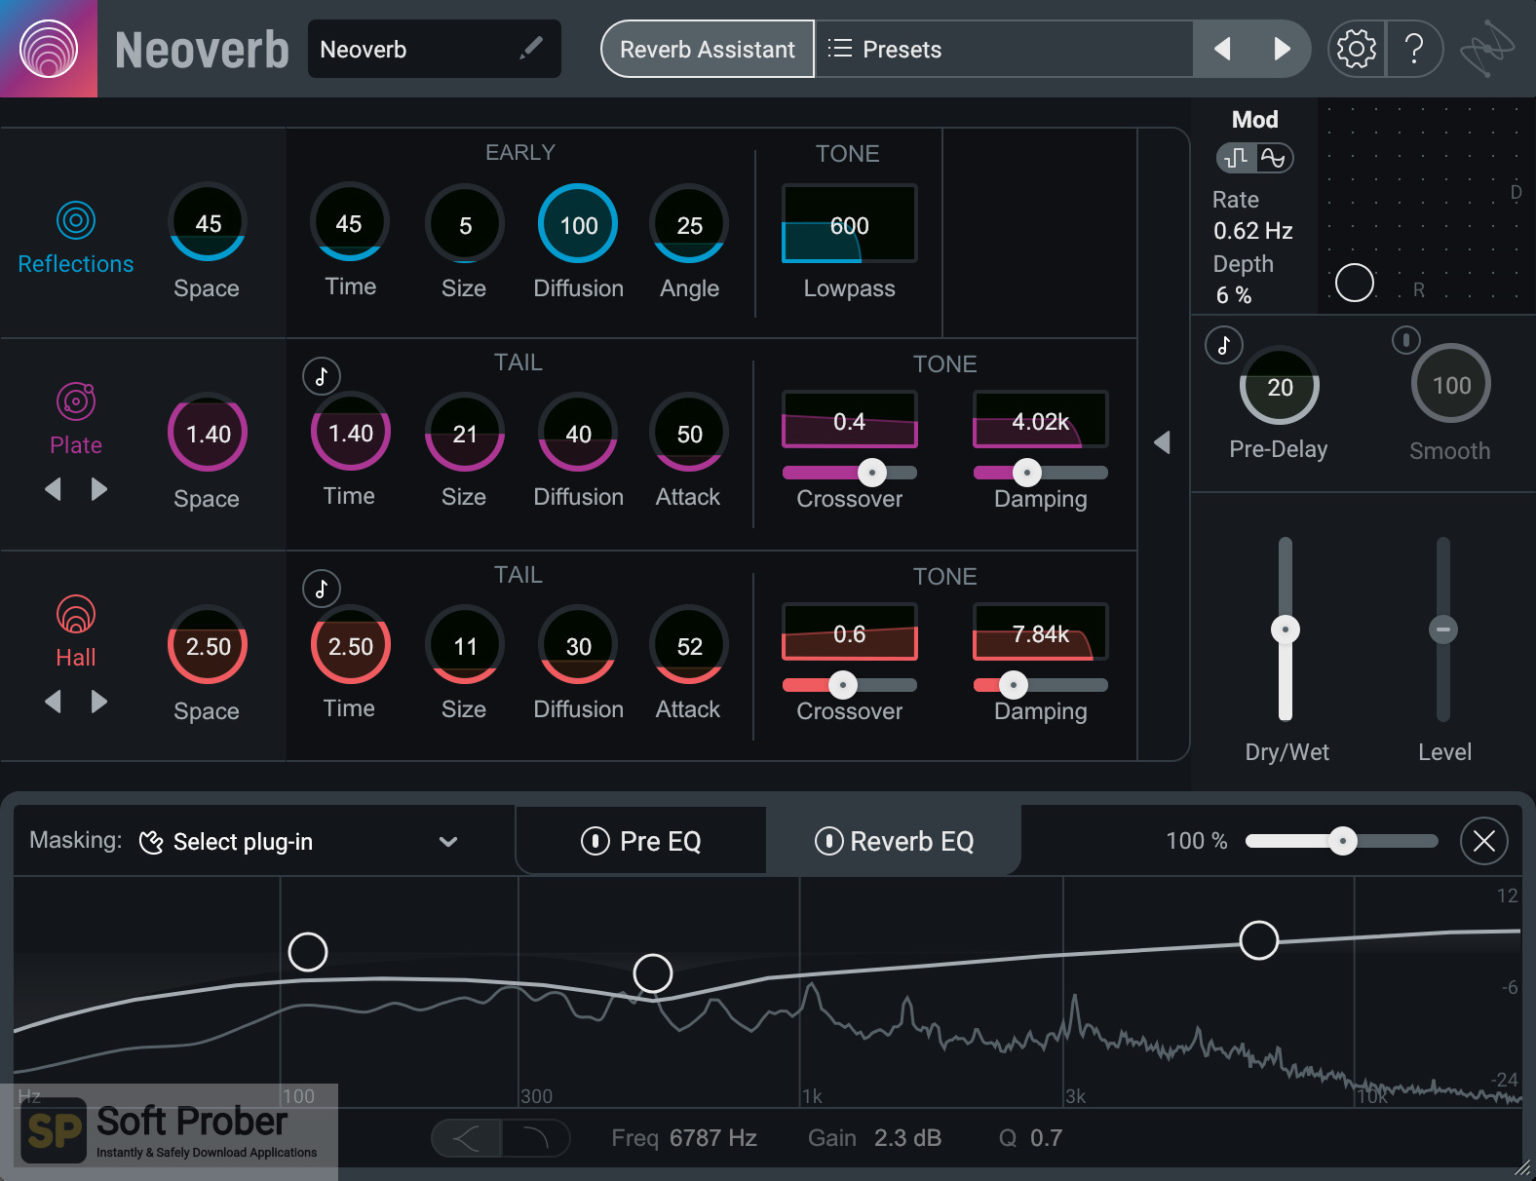 download the last version for mac iZotope Neoverb 1.3.0